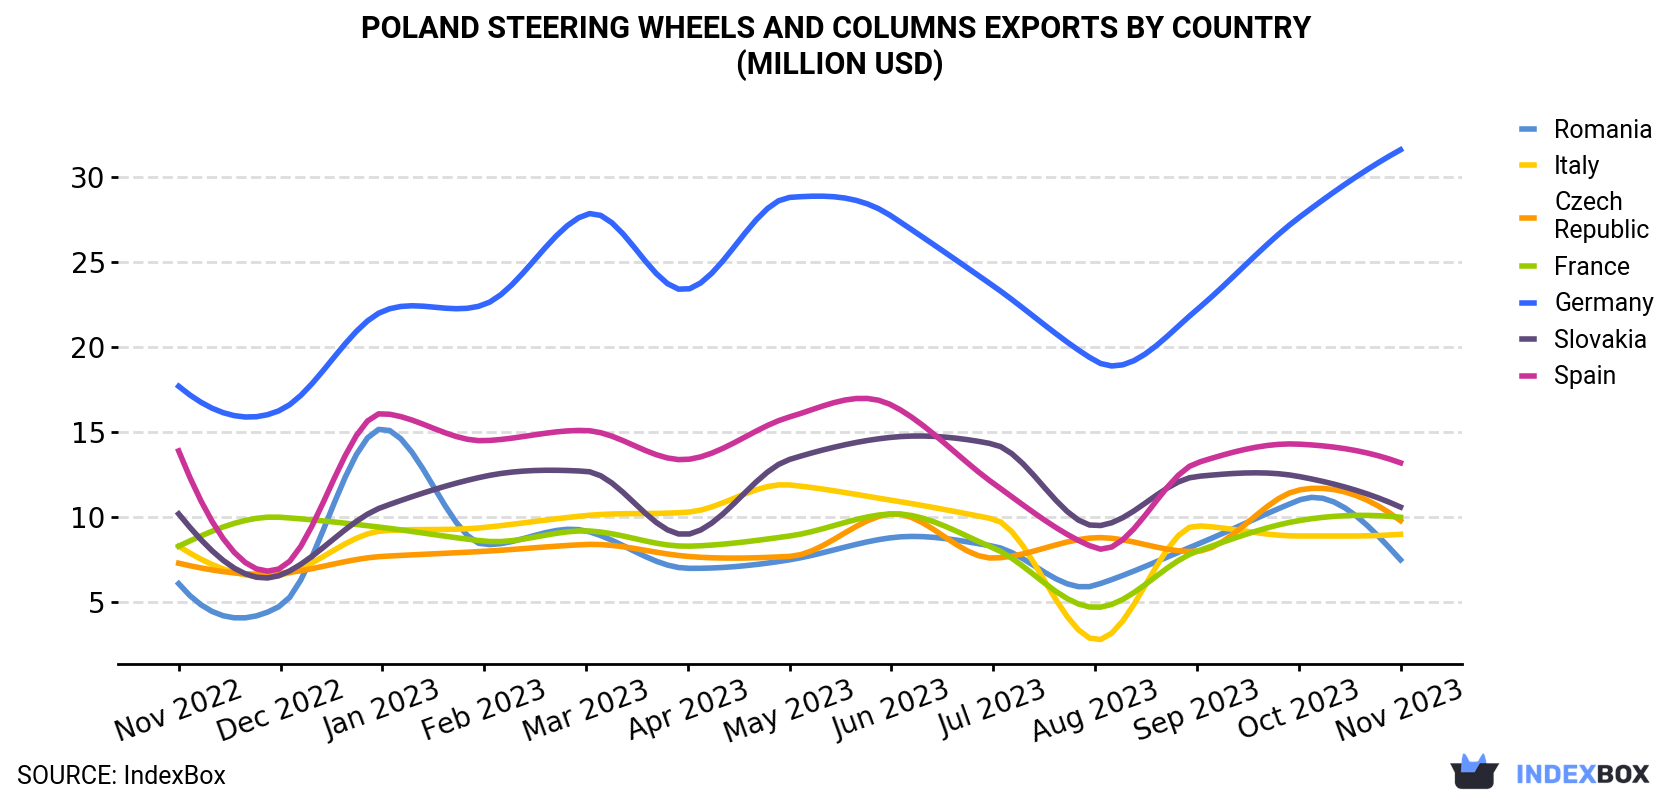 Poland Steering Wheels And Columns Exports By Country (Million USD)